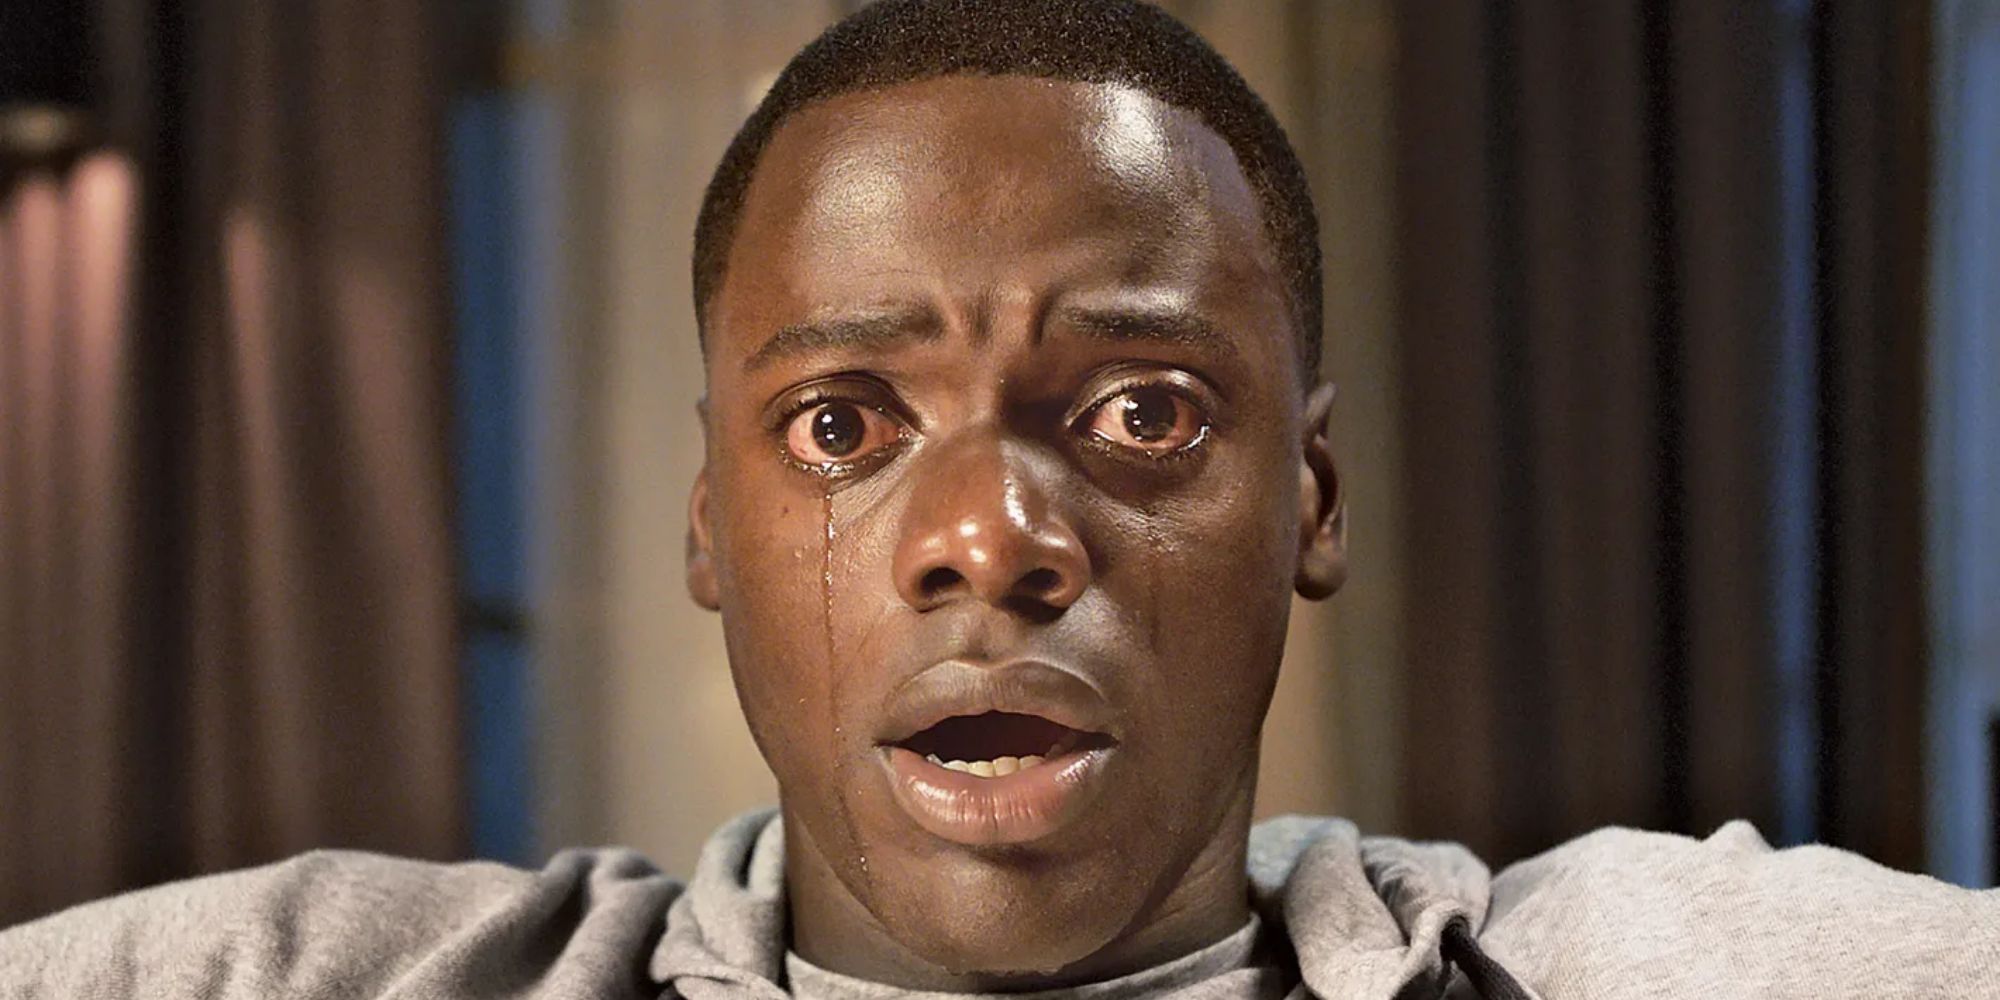 Daniel Kaluuya as Chris Washington crying and distressed in 'Get Out'